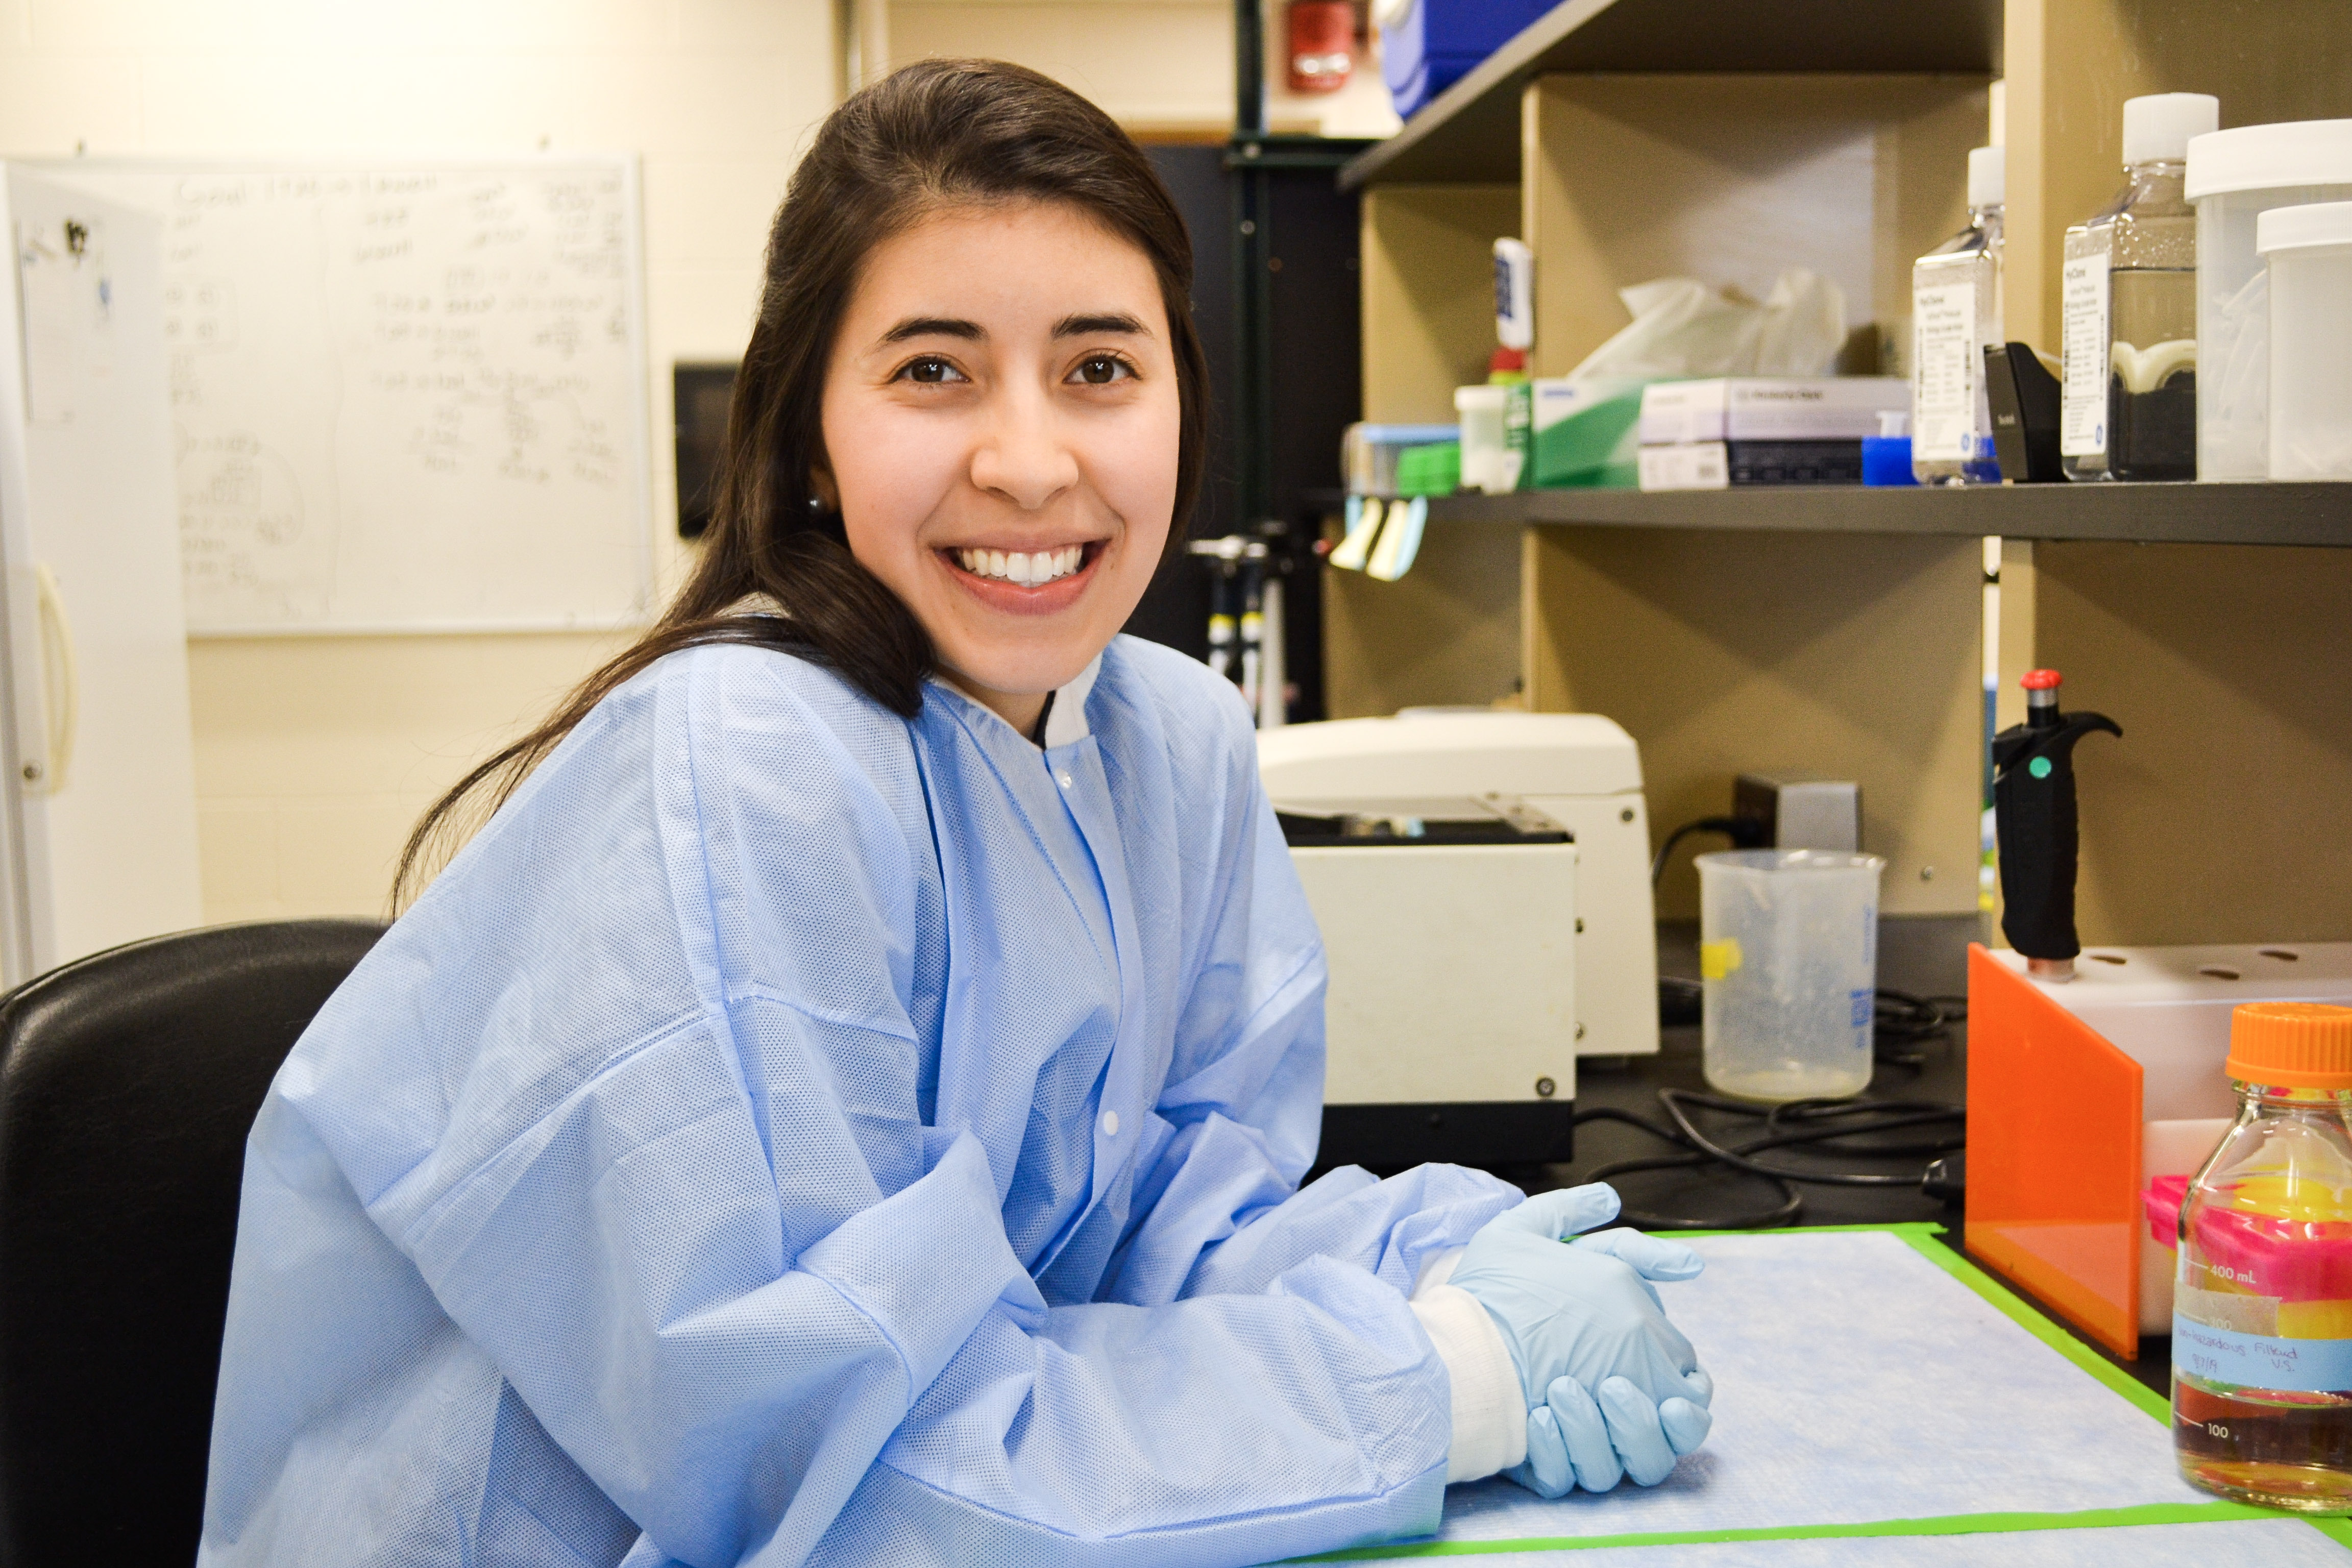 Valeria Sarmiento sees science as a way to help people while learning about the world. (UConn Photo/Christie Wang)